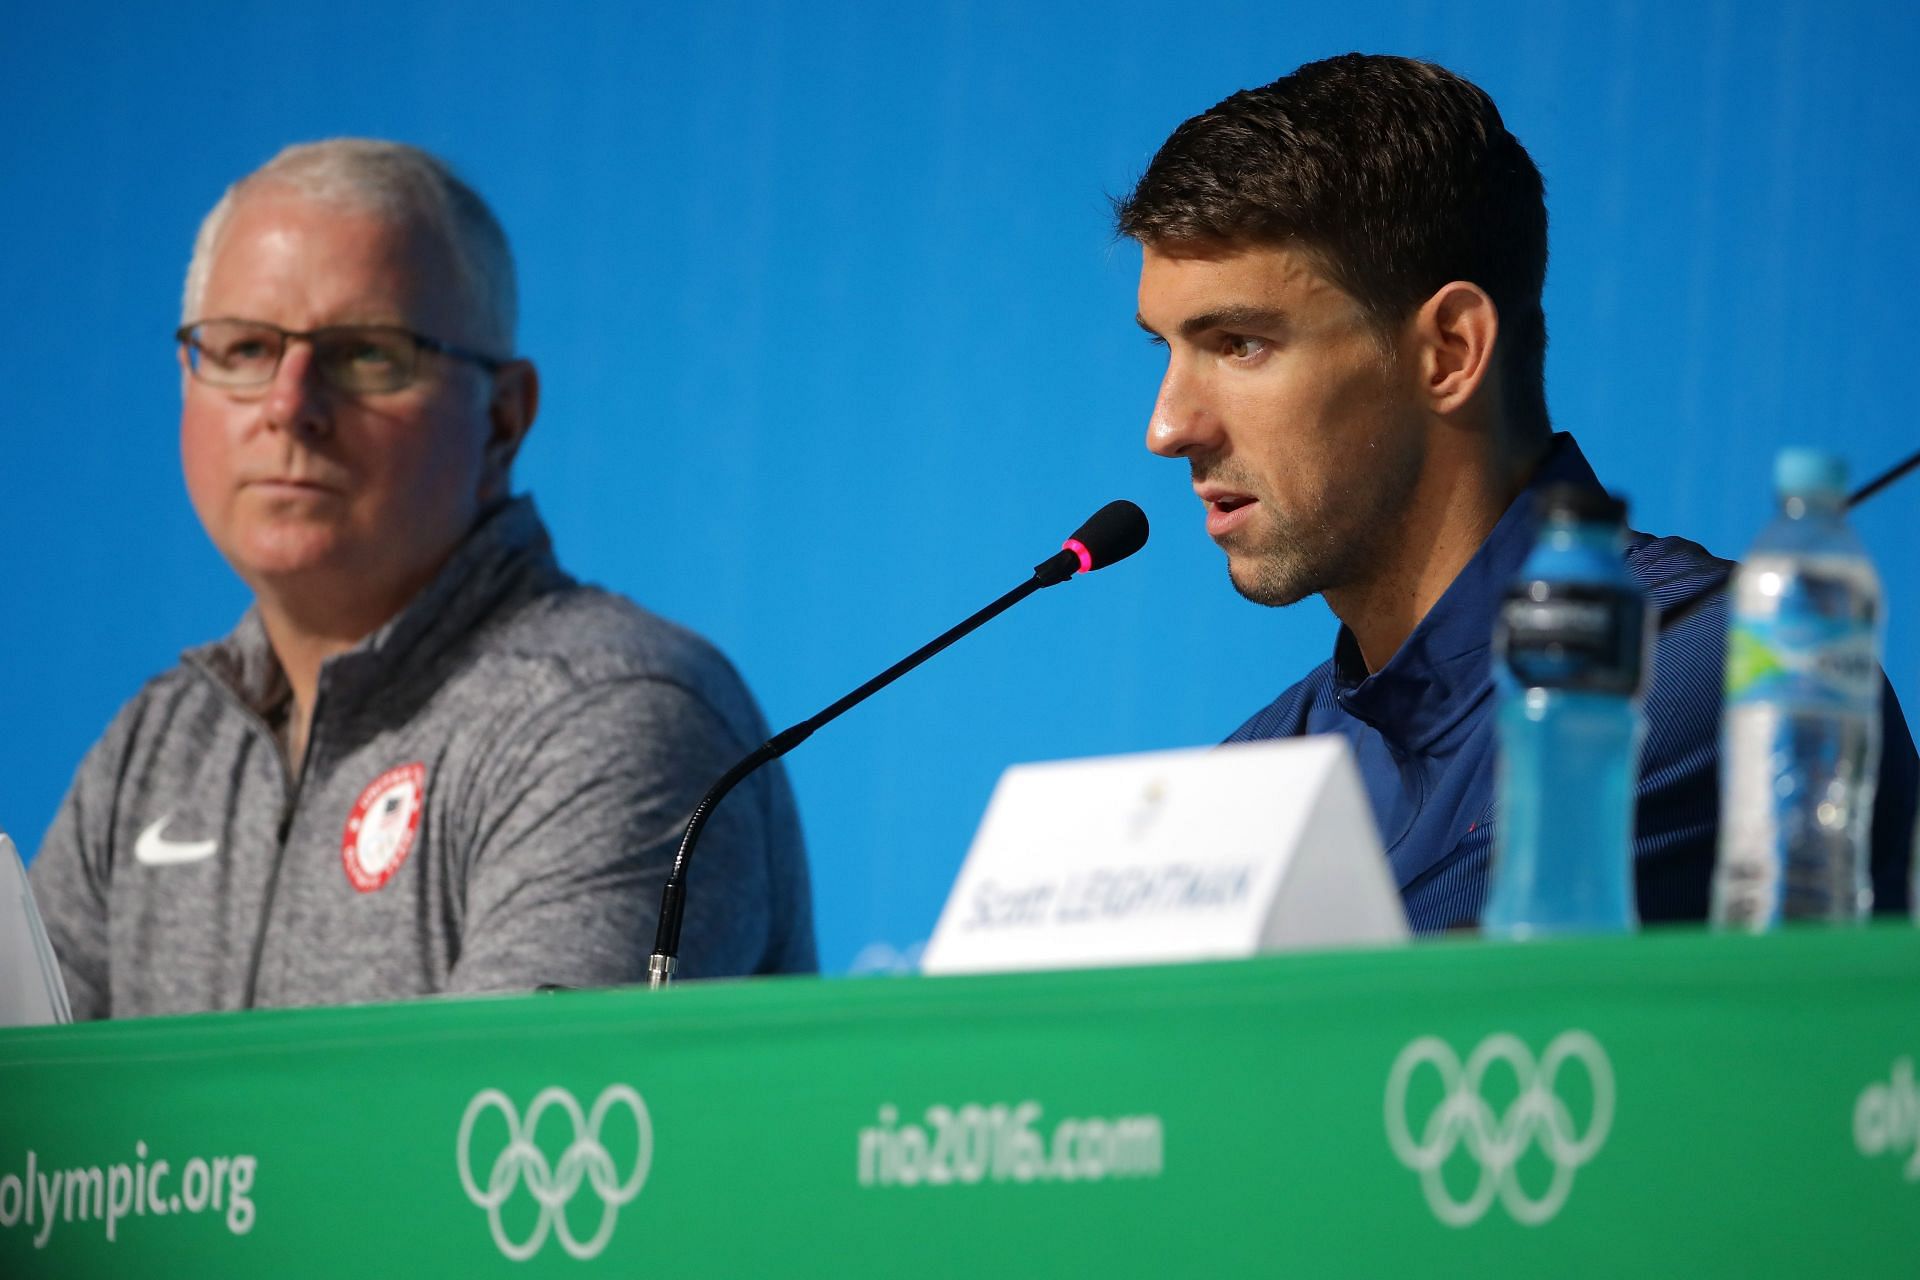 Phelps and Bowman at the 2016 Olympics - Previews